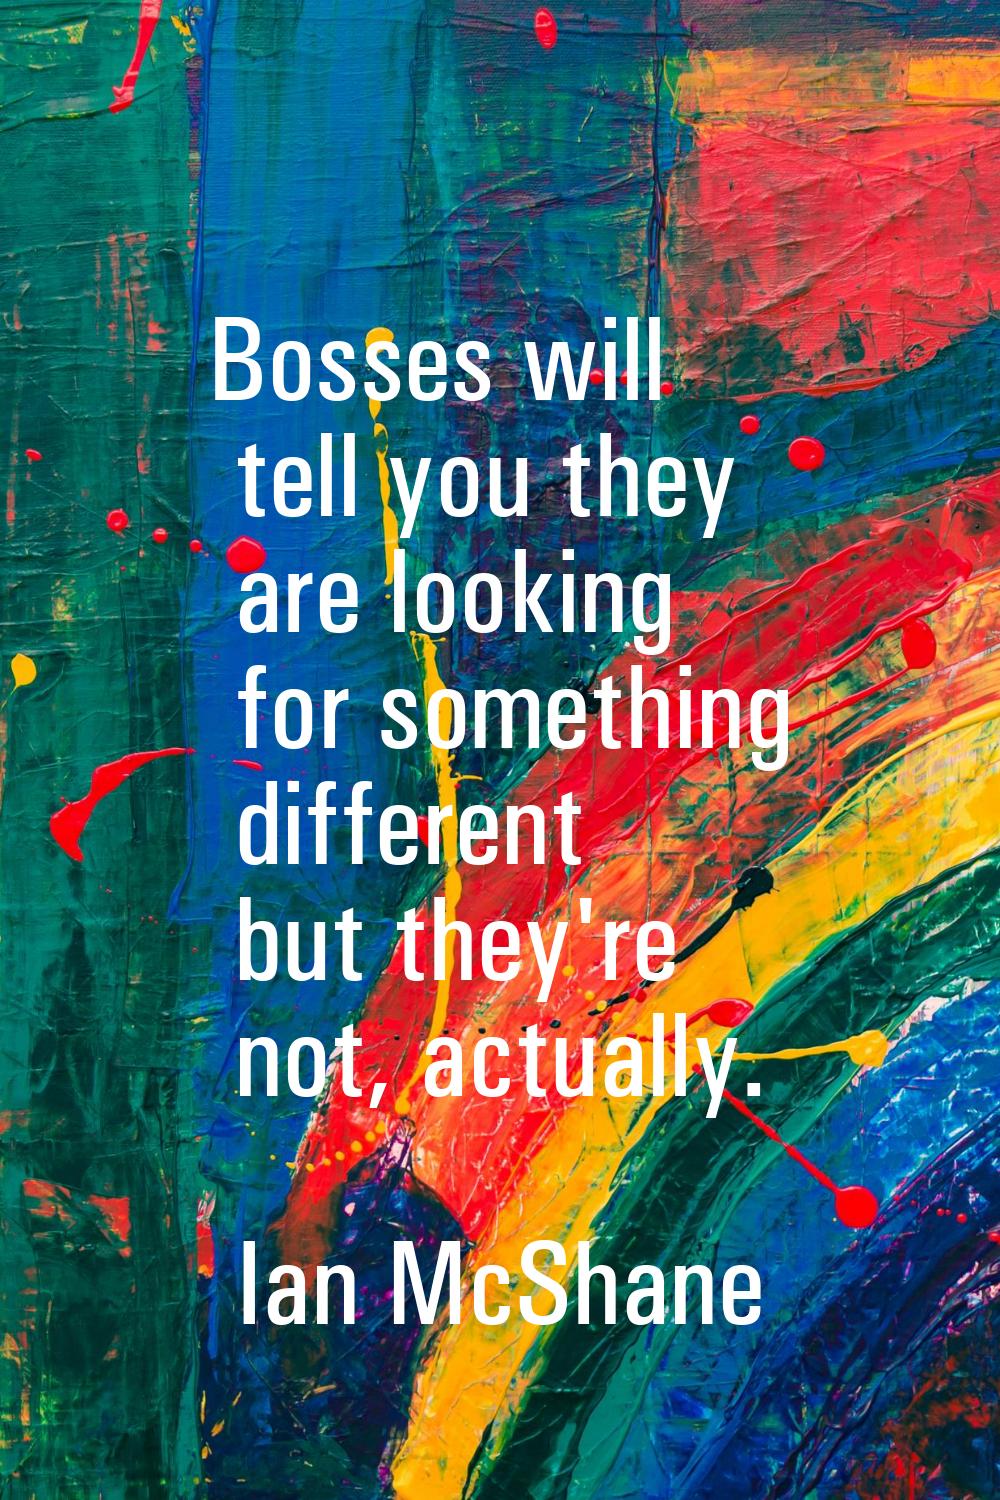 Bosses will tell you they are looking for something different but they're not, actually.